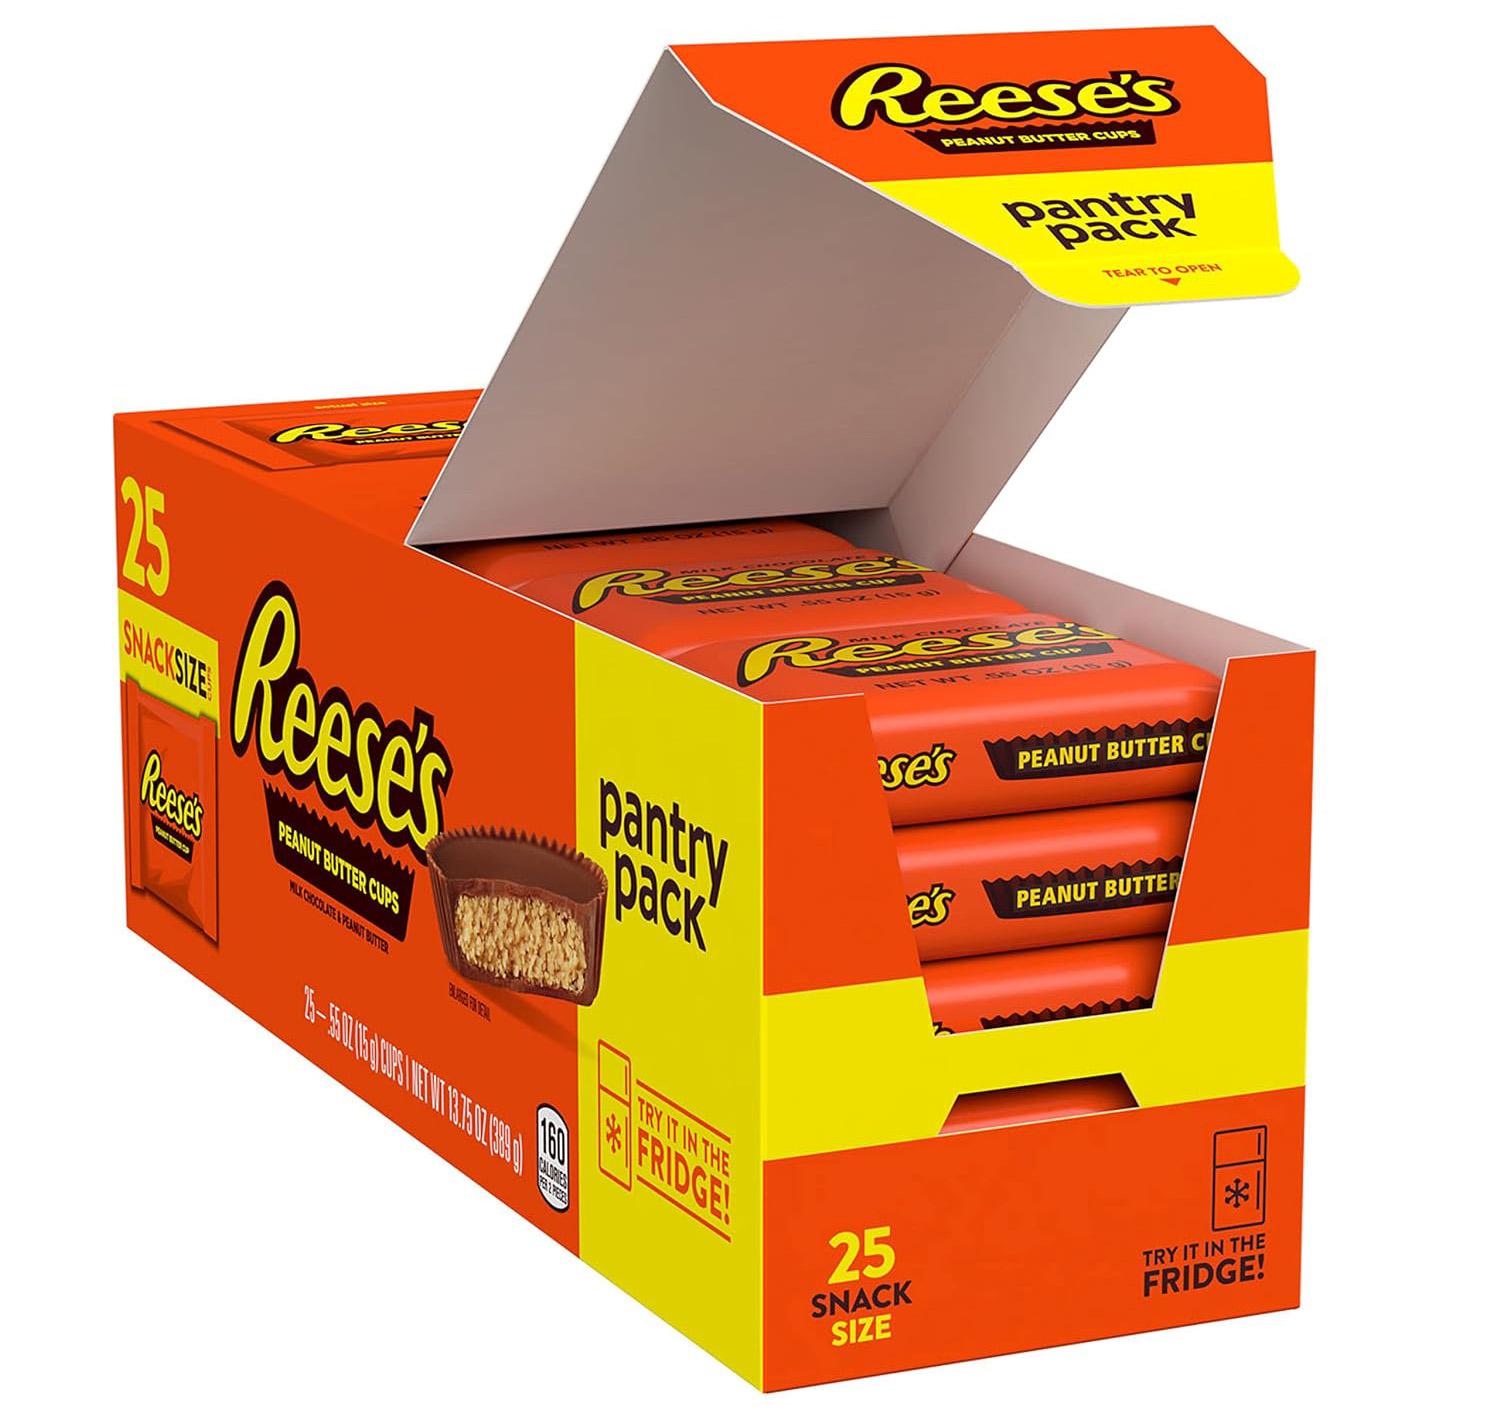 Reeses Milk Chocolate Snack Size Peanut Butter Cups 9 Pack for $4.39 Shipped